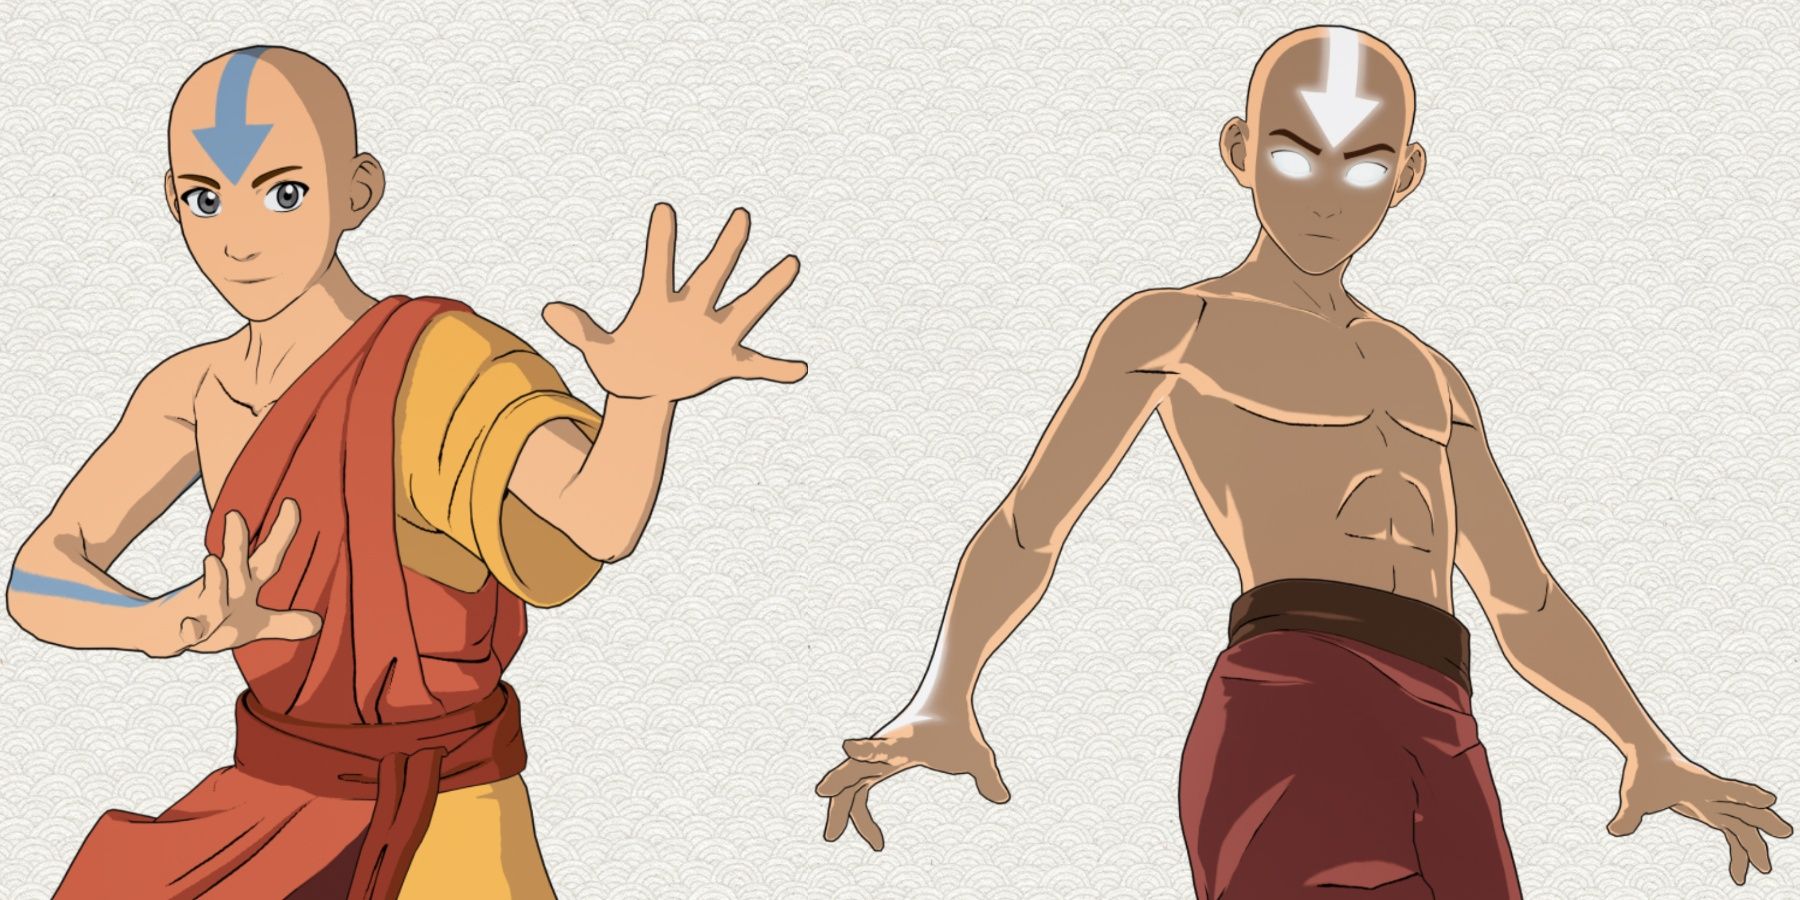 aang standard style next to avatar state style